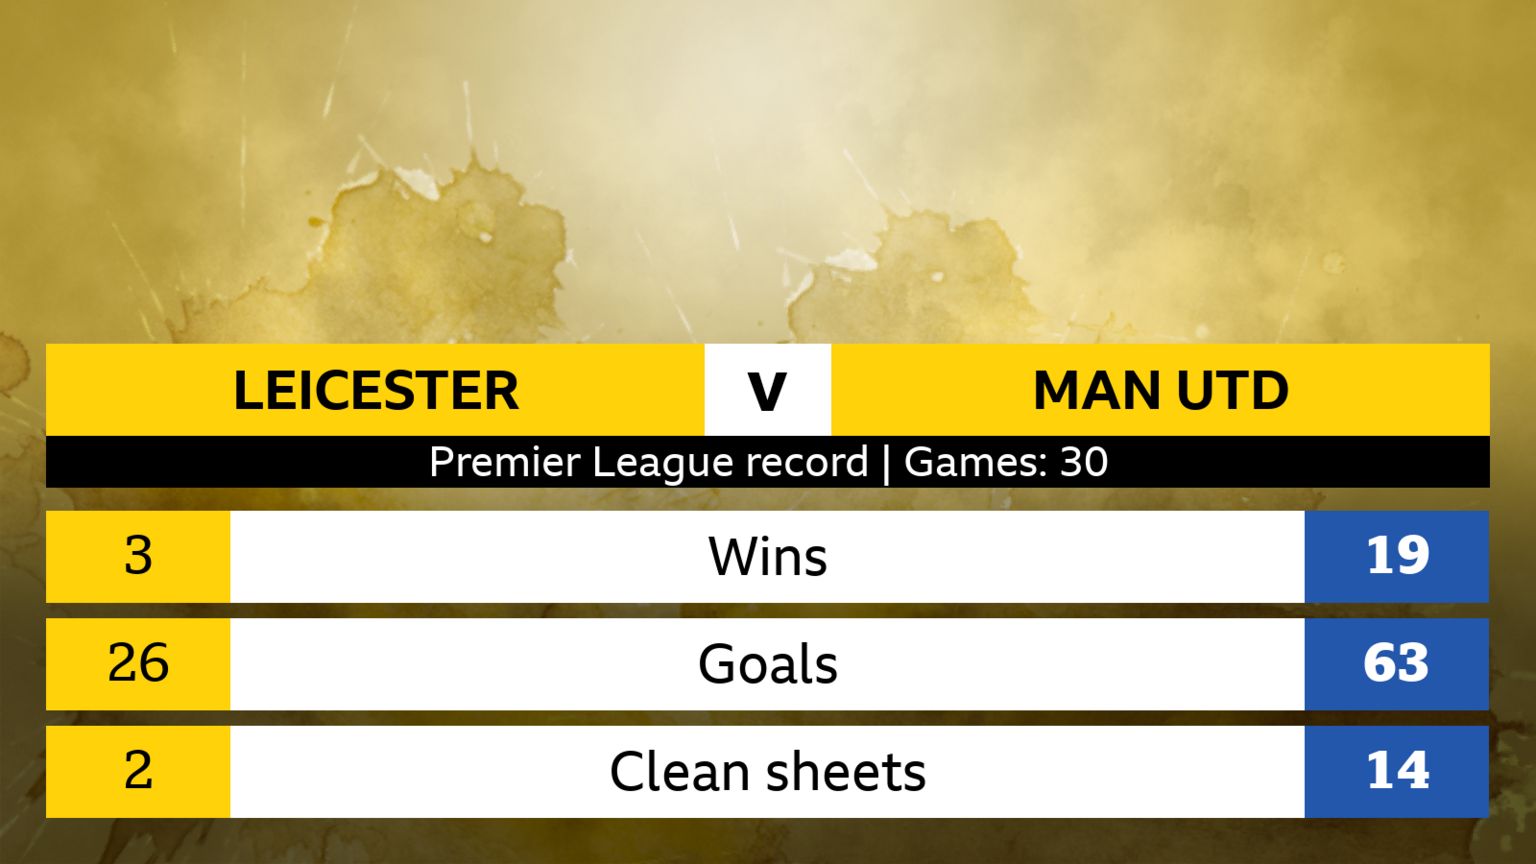 Premier League record, 30 games. Leicester: 3 wins, 26 goals, 2 clean sheets. Manchester United: 19 wins, 63 goals, 14 clean sheets.